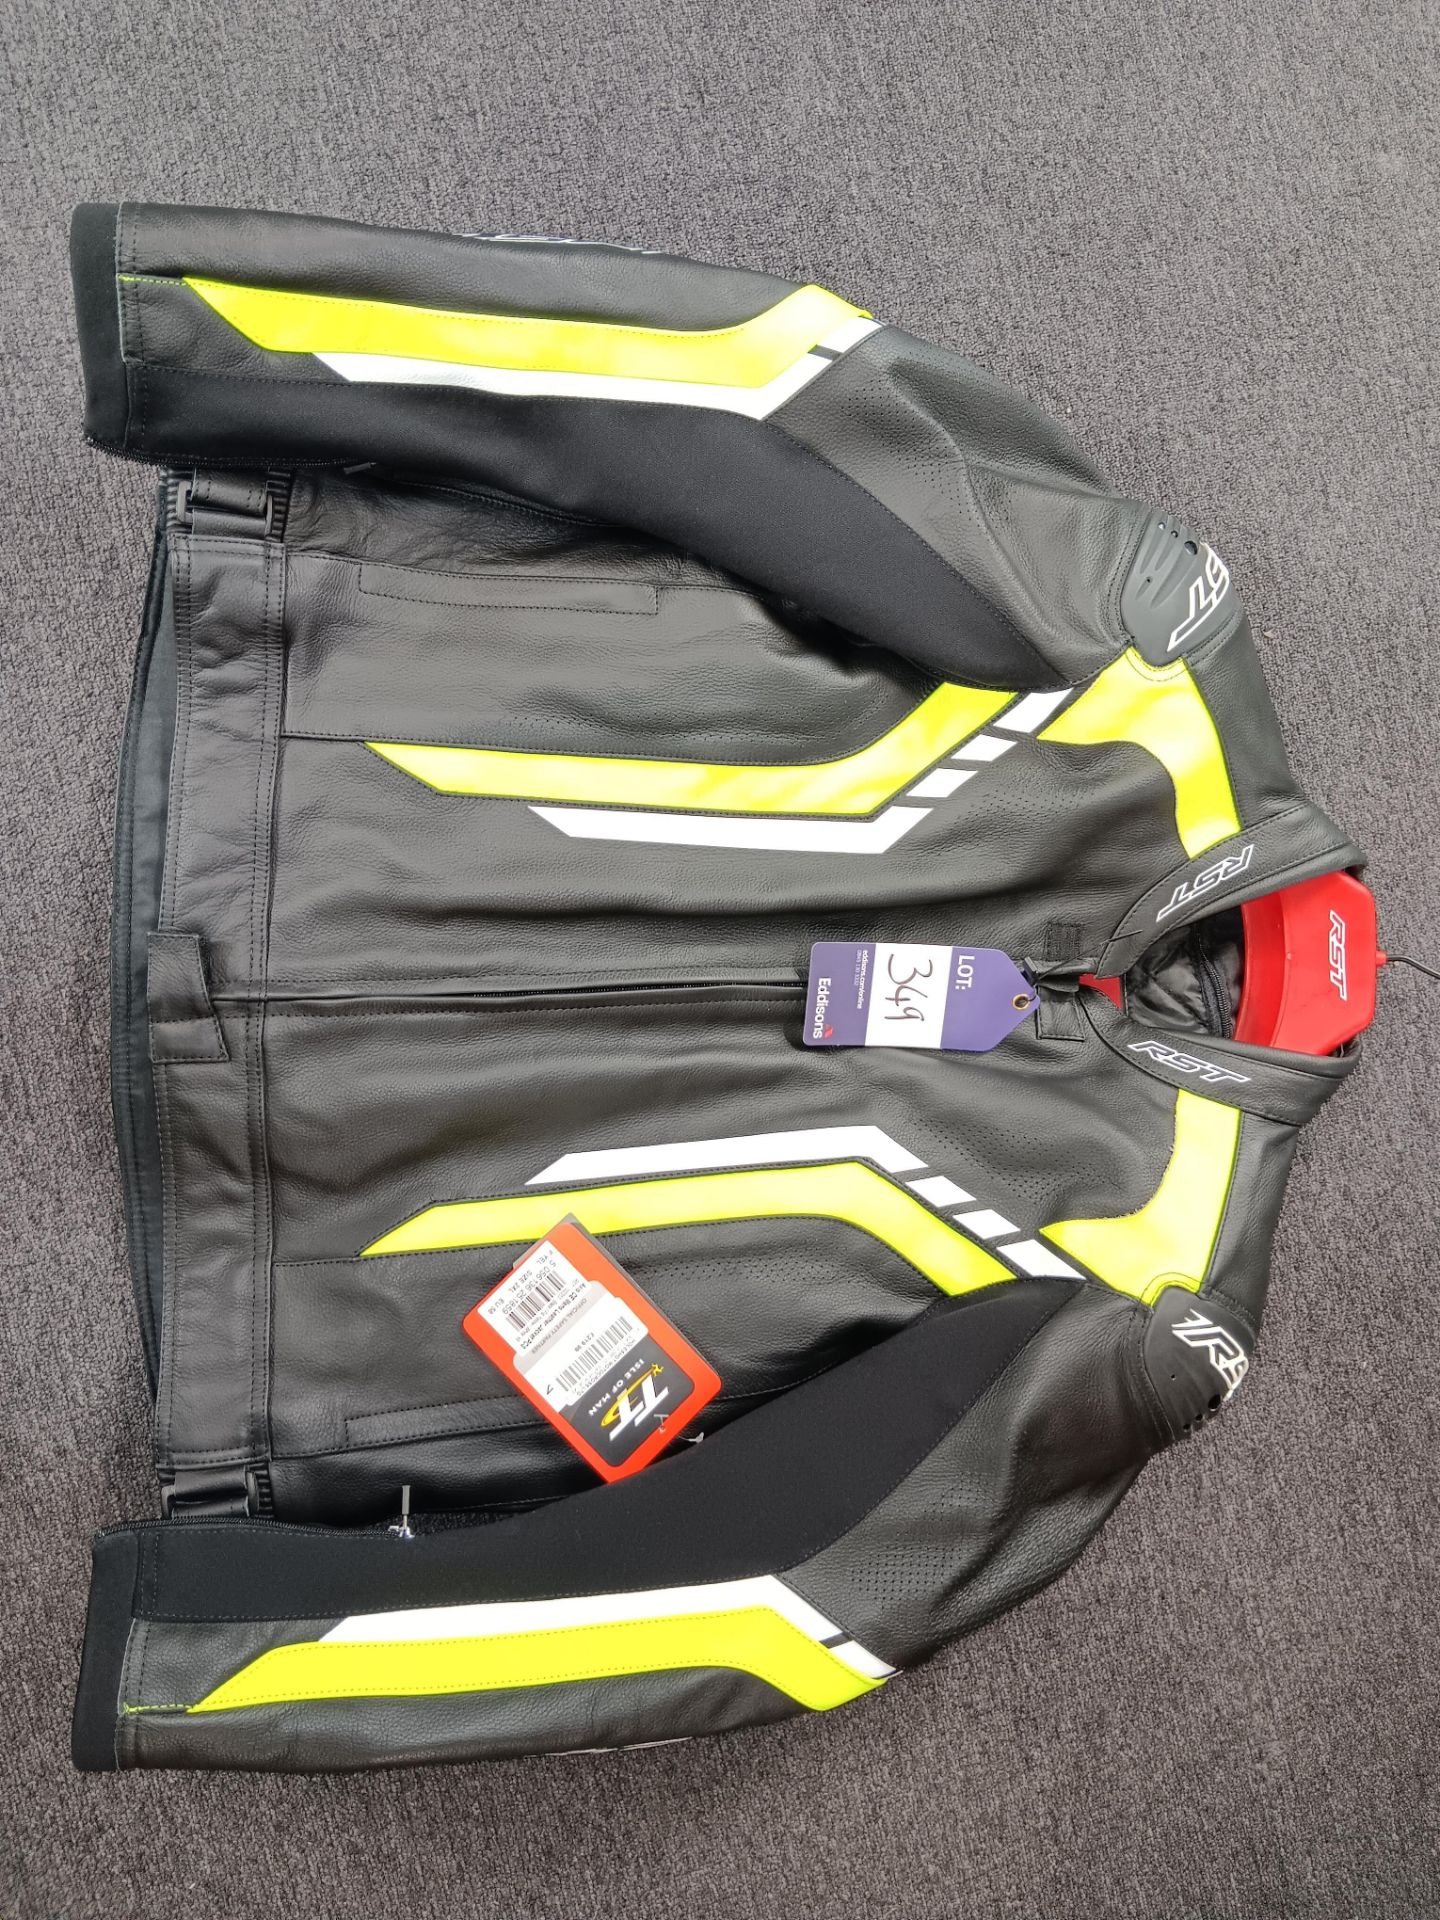 RST AXIS CE MENS LEATHER JACKET BK/FL YL/WH 48 (Retail Price £219.99)